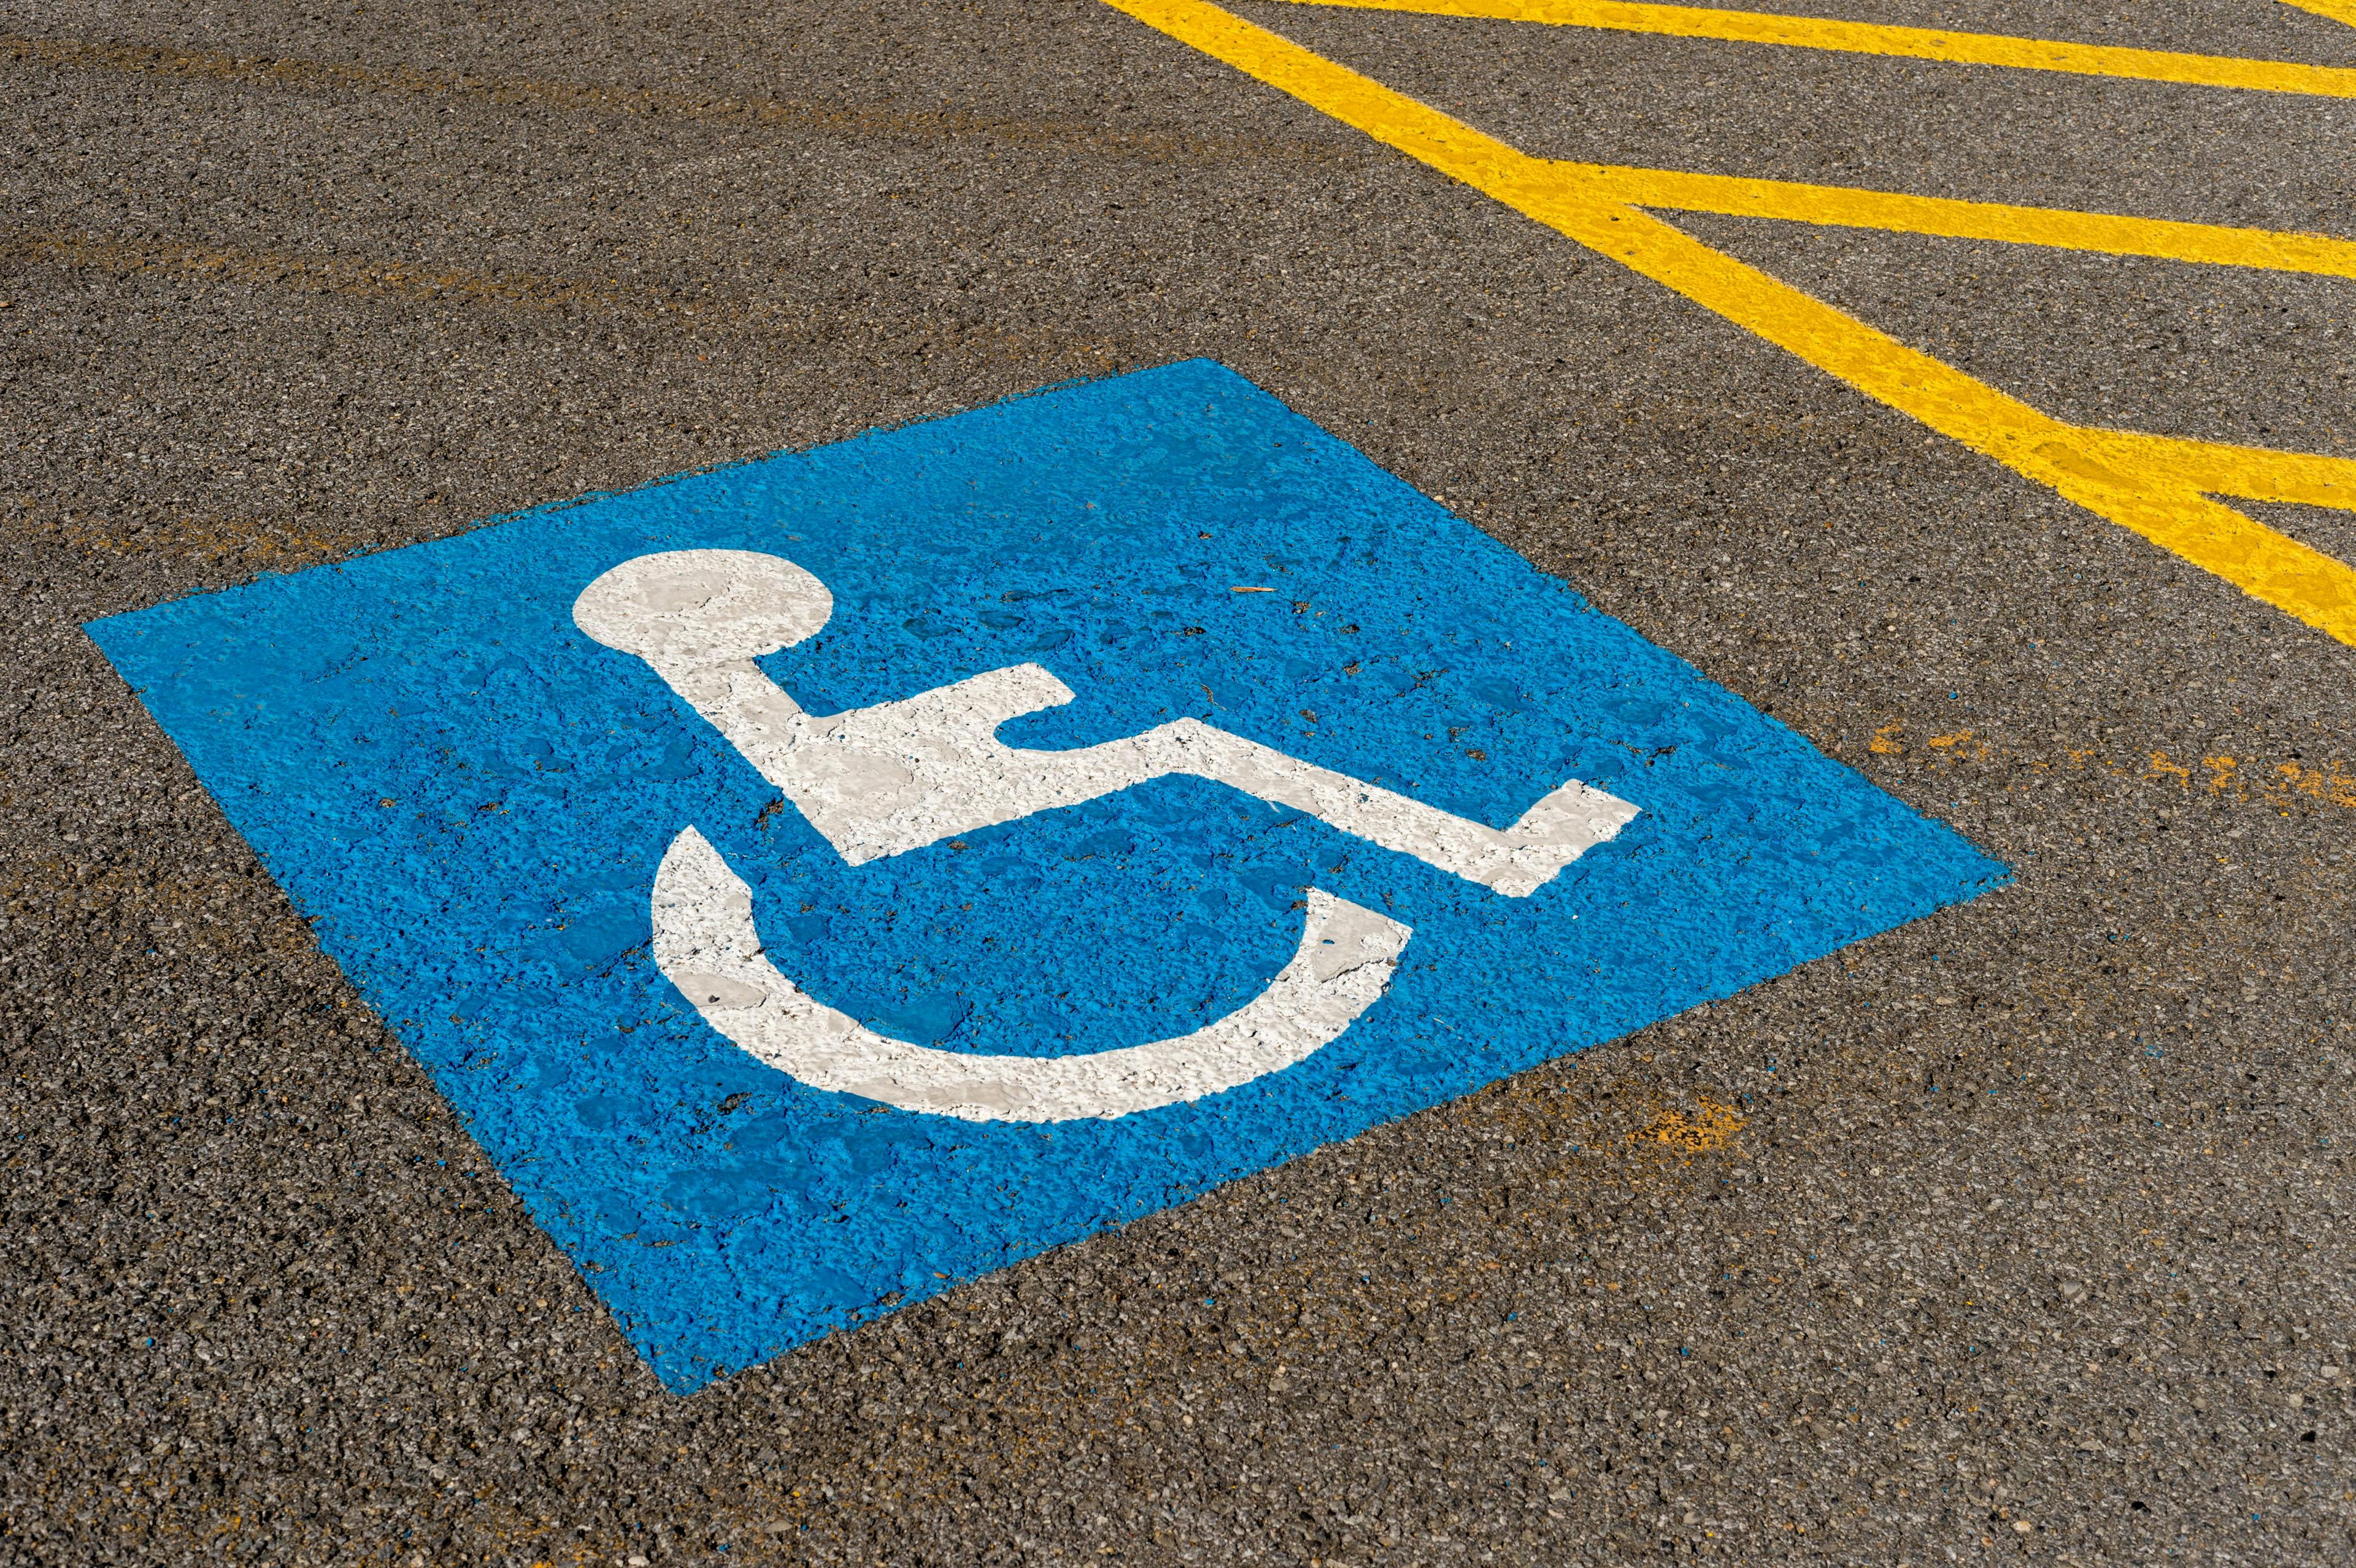 Tyrosine Kinase Inhibitor Shows Positive Results in Slowing Slide to MS Disability 